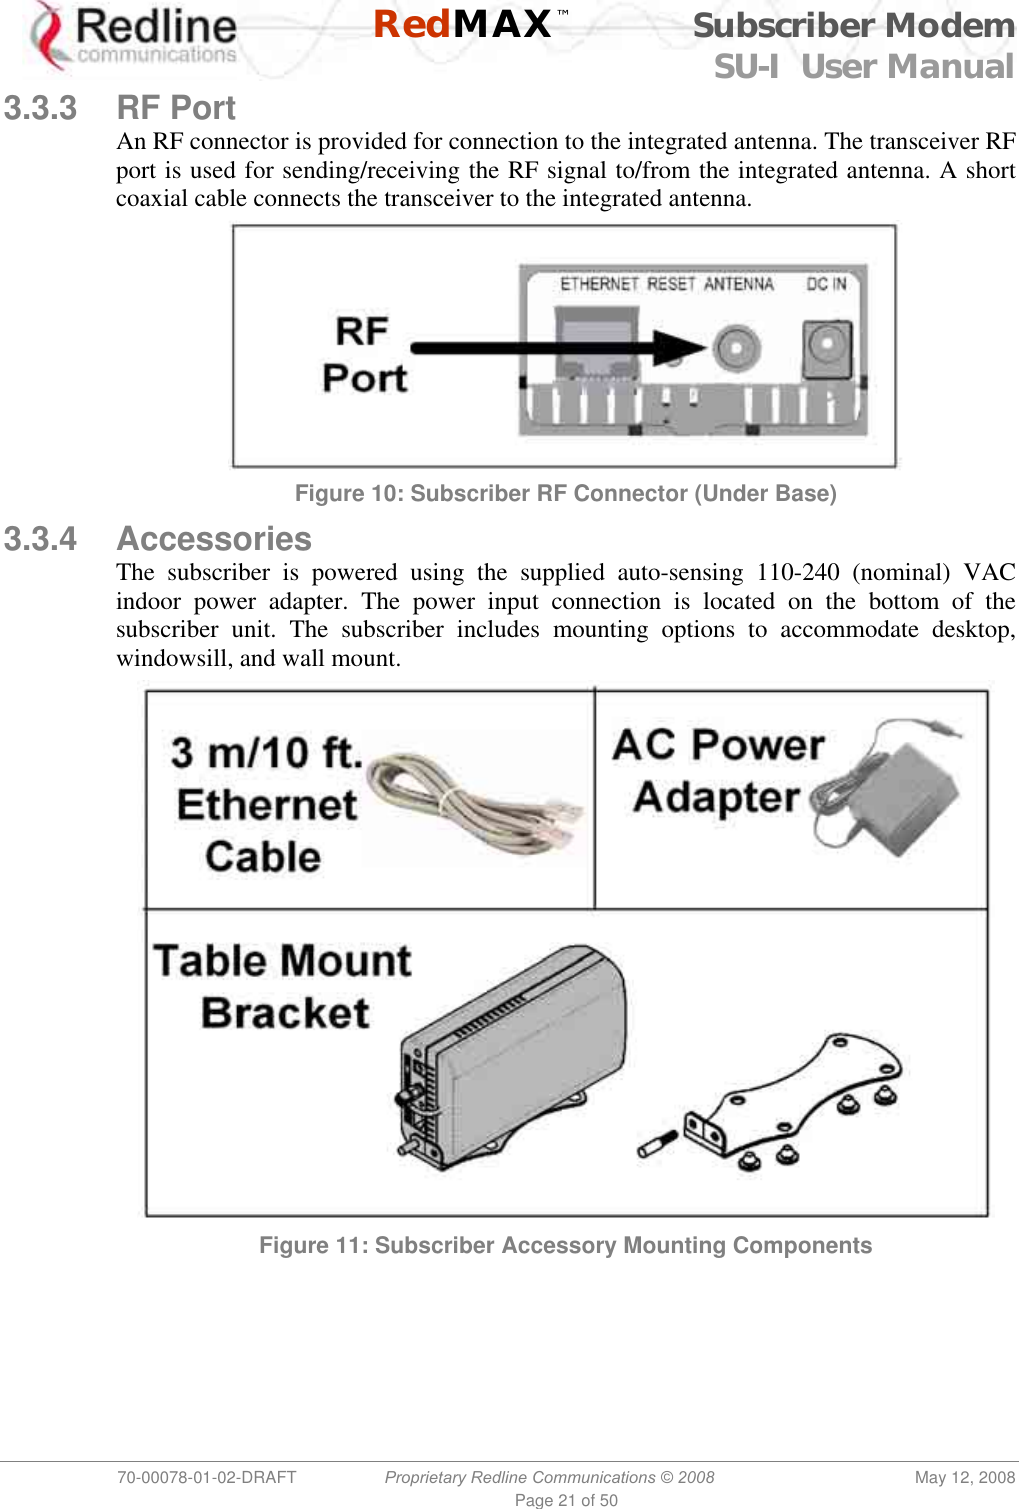    RedMAX™ Subscriber Modem SU-I  User Manual  70-00078-01-02-DRAFT  Proprietary Redline Communications © 2008  May 12, 2008 Page 21 of 50 3.3.3 RF Port An RF connector is provided for connection to the integrated antenna. The transceiver RF port is used for sending/receiving the RF signal to/from the integrated antenna. A short coaxial cable connects the transceiver to the integrated antenna.  Figure 10: Subscriber RF Connector (Under Base) 3.3.4 Accessories The subscriber is powered using the supplied auto-sensing 110-240 (nominal) VAC indoor power adapter. The power input connection is located on the bottom of the subscriber unit. The subscriber includes mounting options to accommodate desktop, windowsill, and wall mount.  Figure 11: Subscriber Accessory Mounting Components 